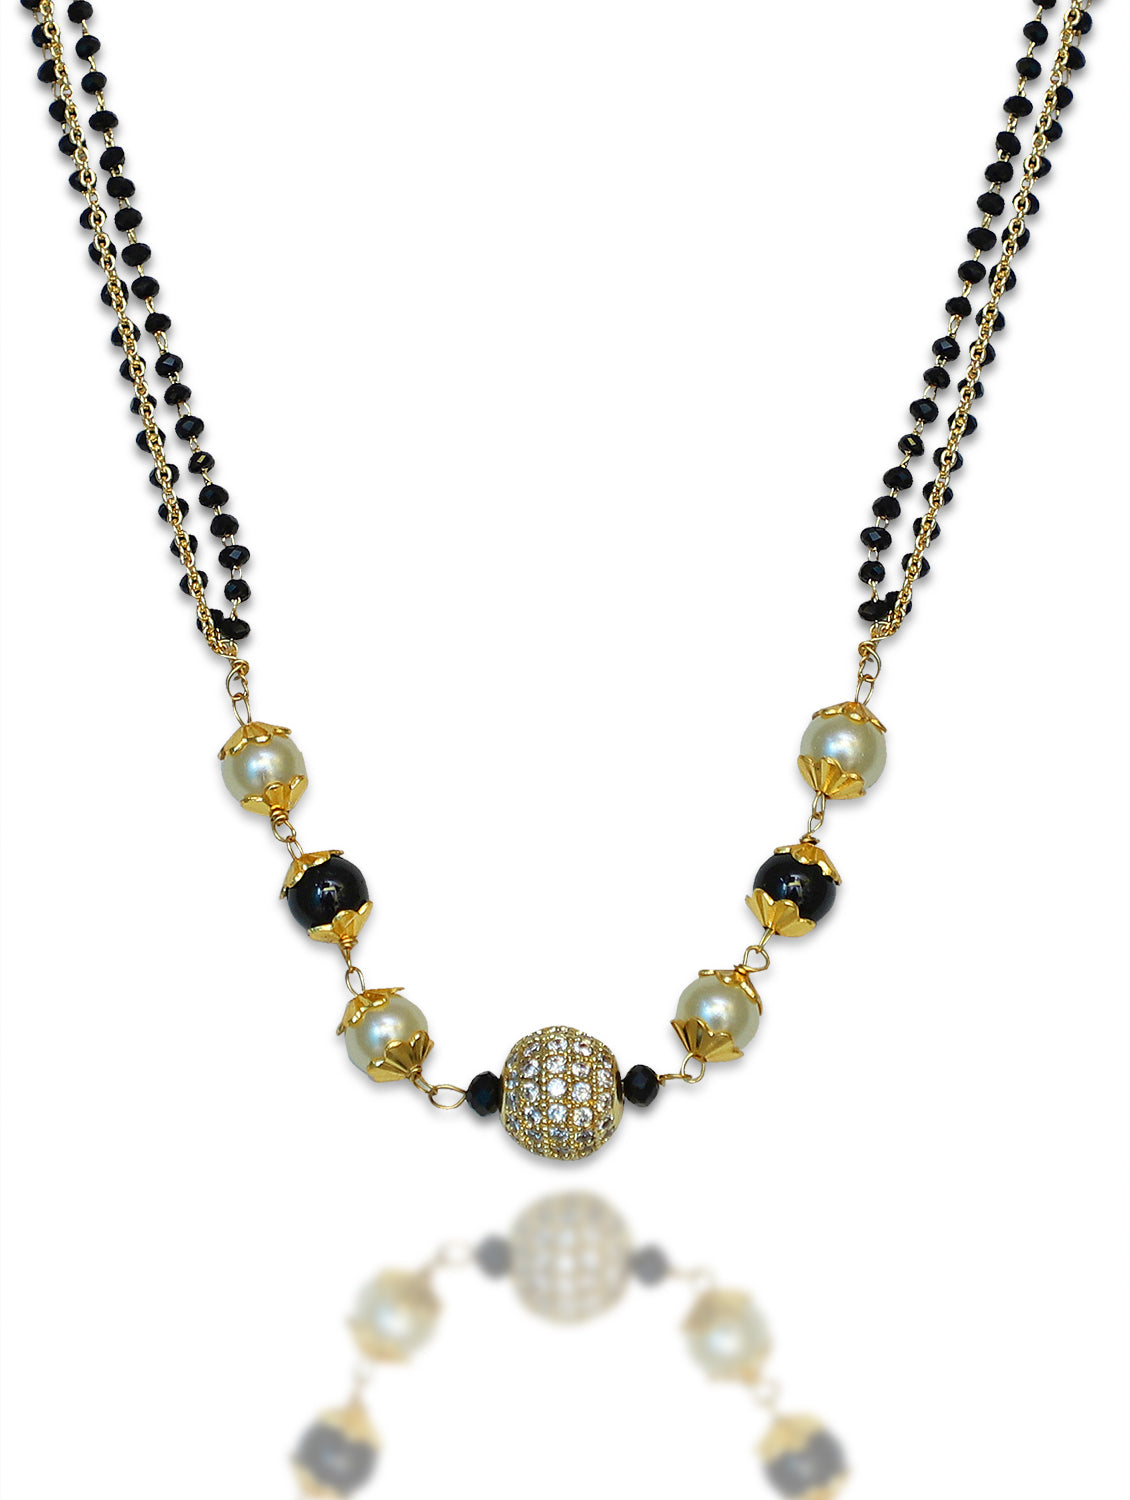 Short Mangalsutra Designs Gold Plated मंगळसूत्र Black Beads White Black Pearls Ball shape Pendant (18 Inches)